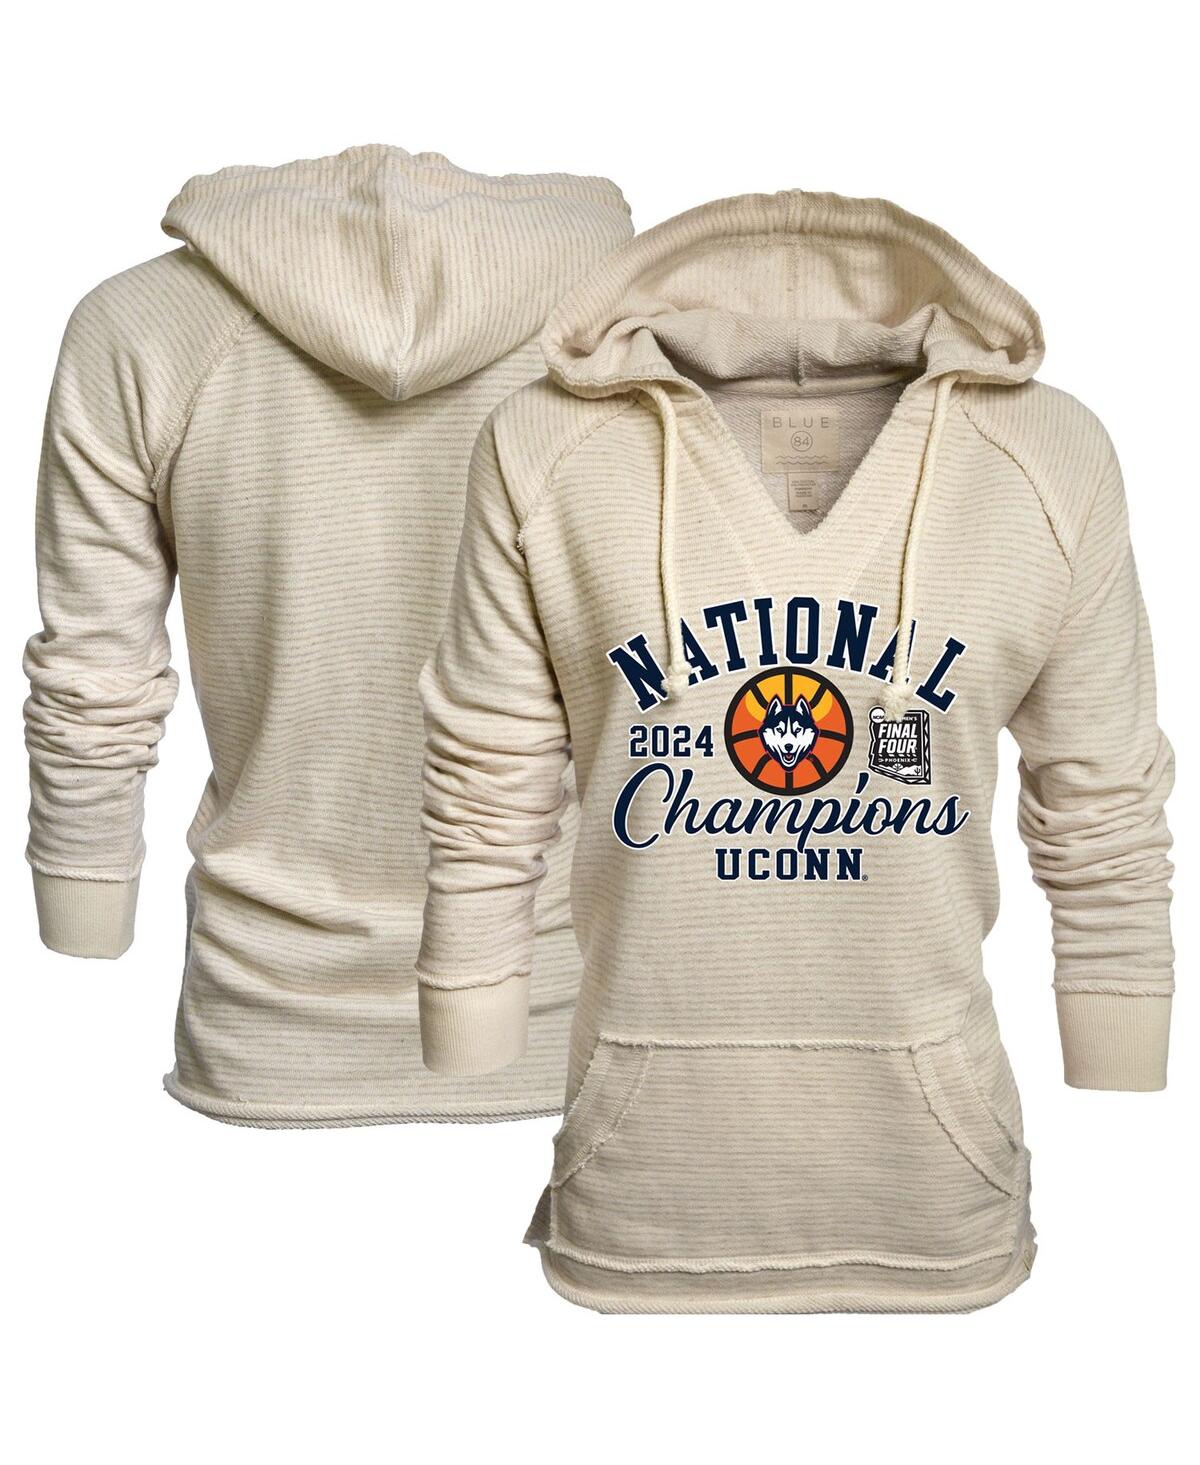 Women's Cream UConn Huskies 2024 Ncaa Men's Basketball National Champions Striped French Terry V-Neck Pullover Hoodie - Cream